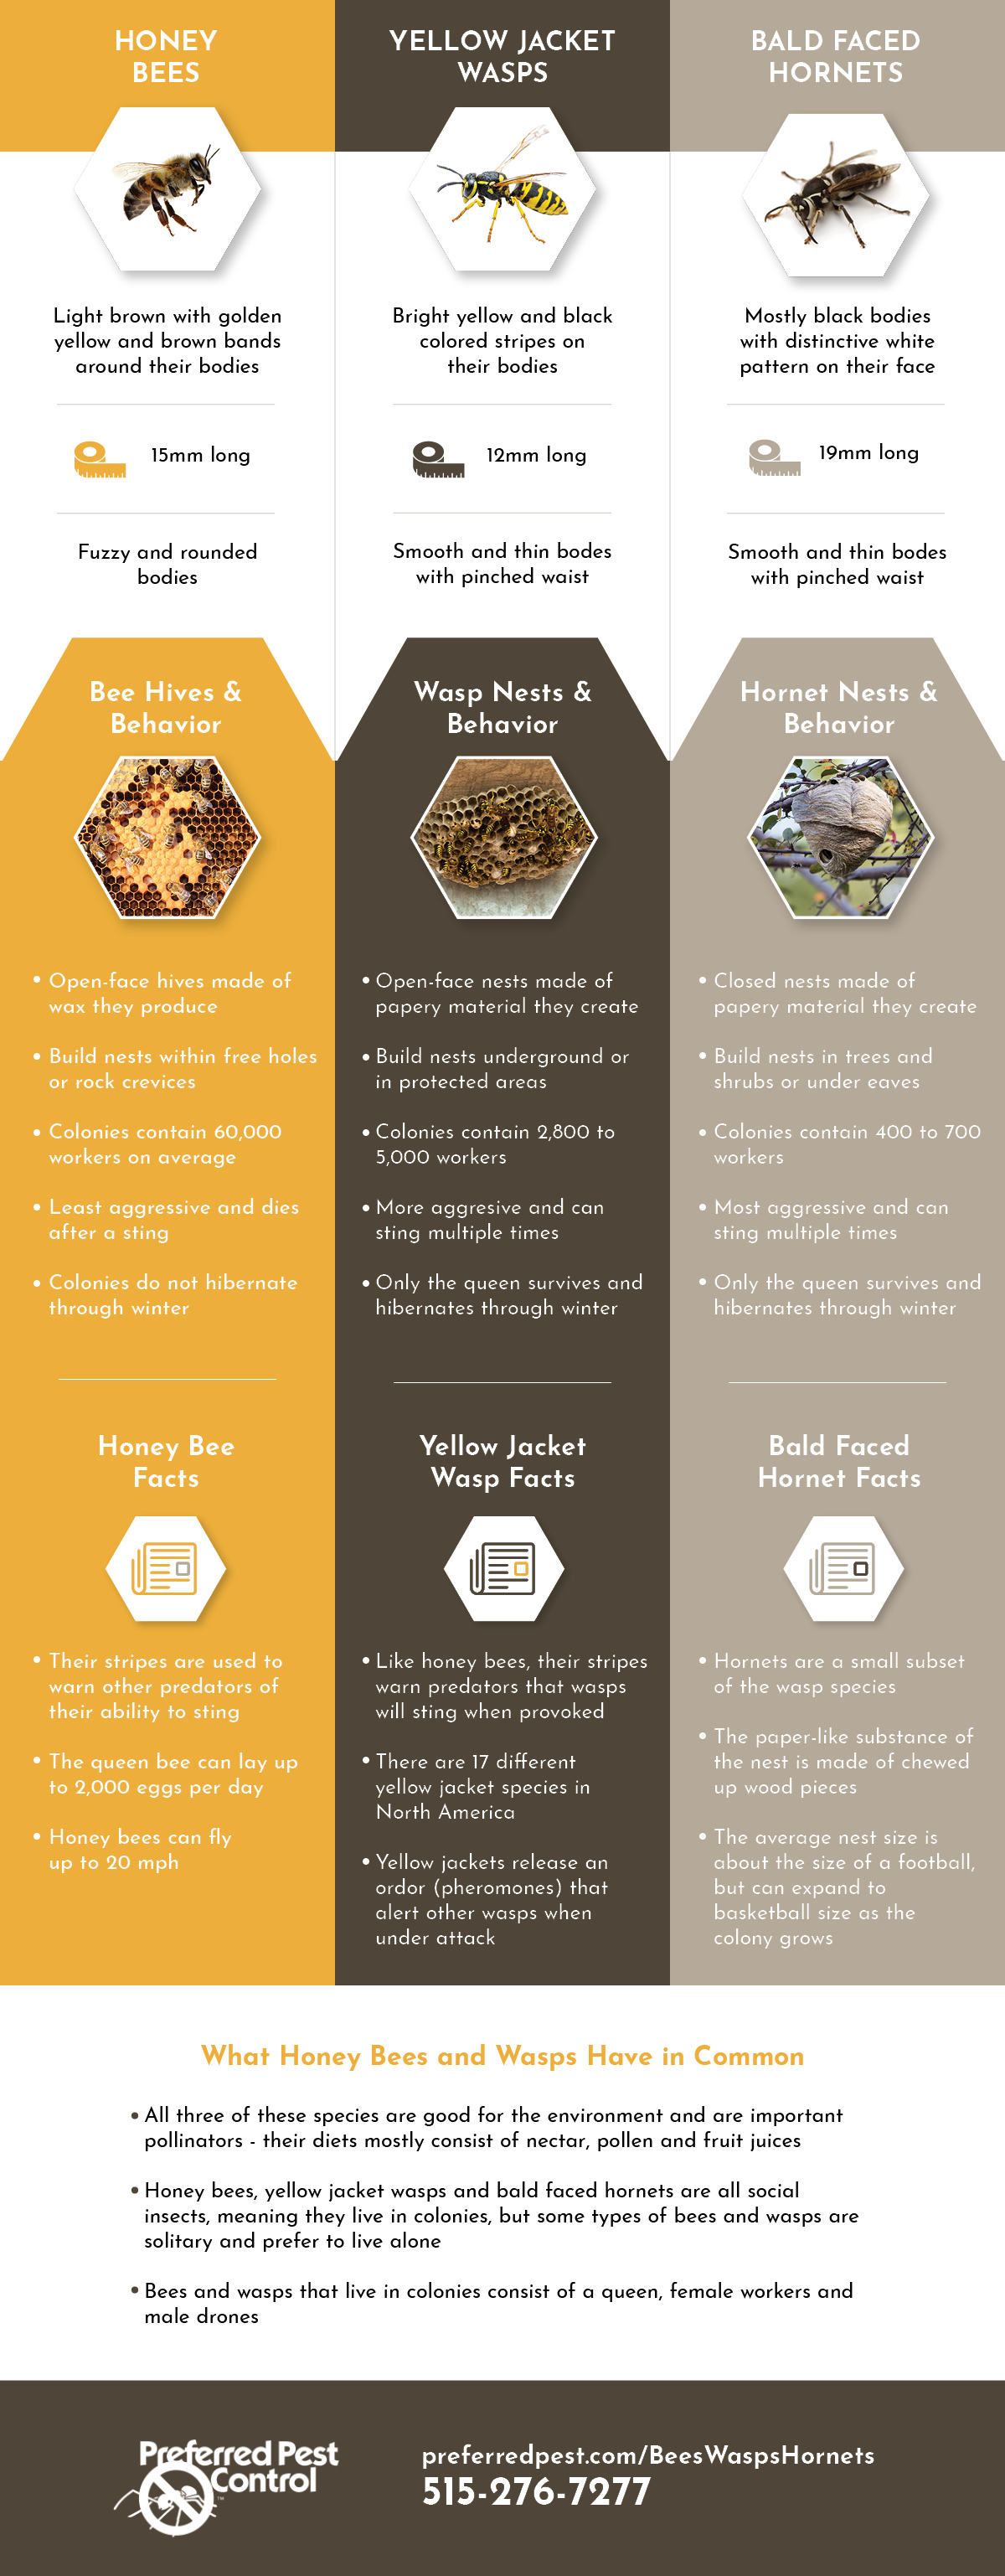 difference between bees wasps and hornets.